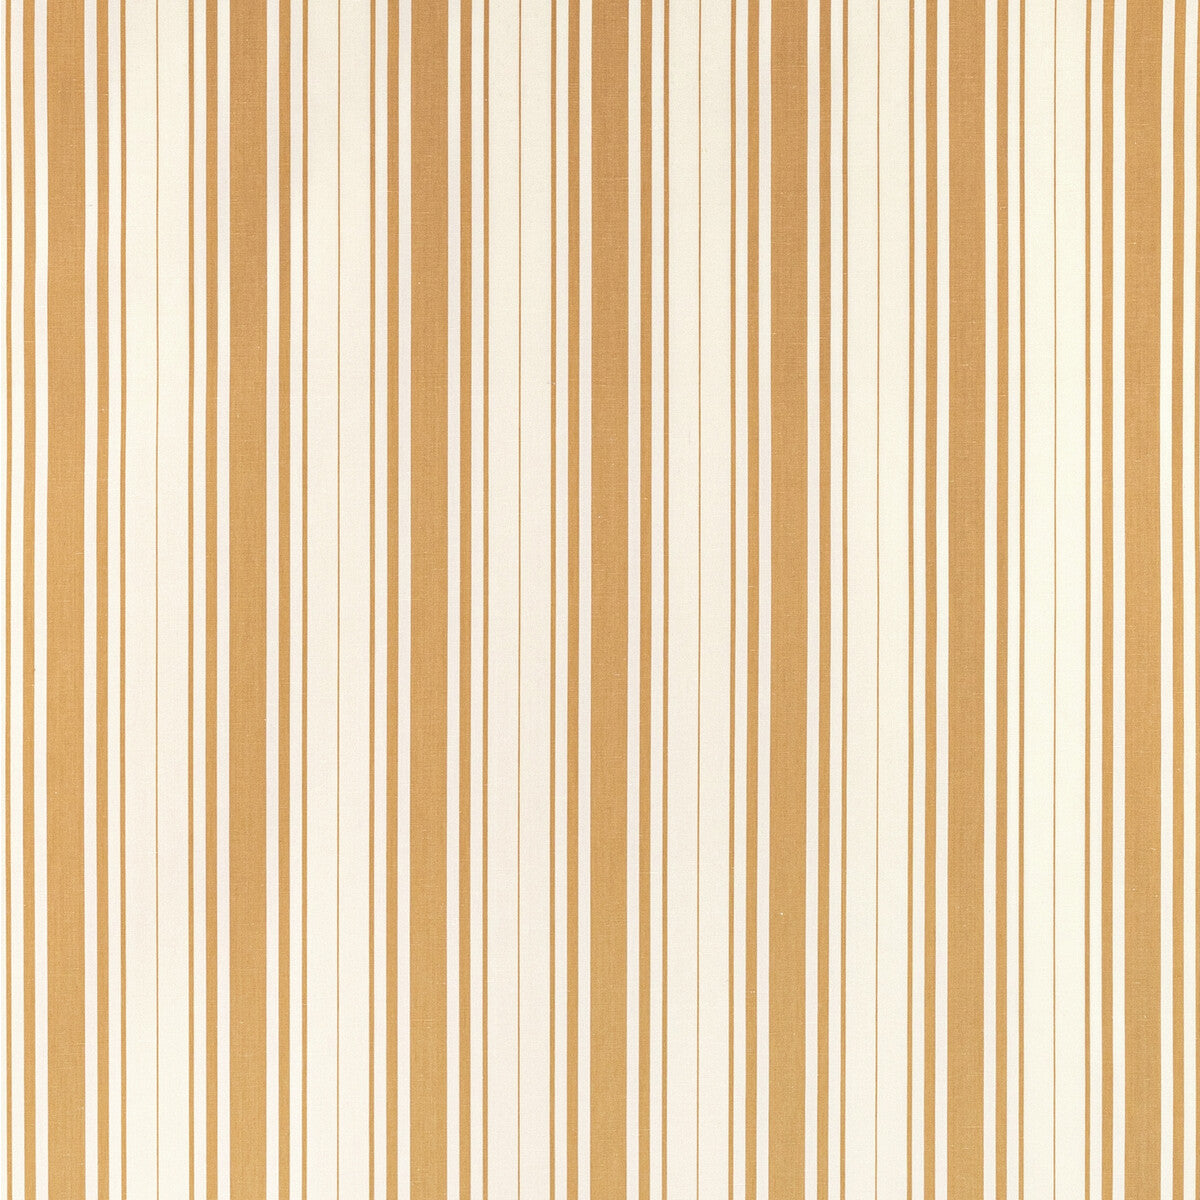 Baldwin Stripe fabric in saffron color - pattern 2022100.4.0 - by Lee Jofa in the Sarah Bartholomew collection